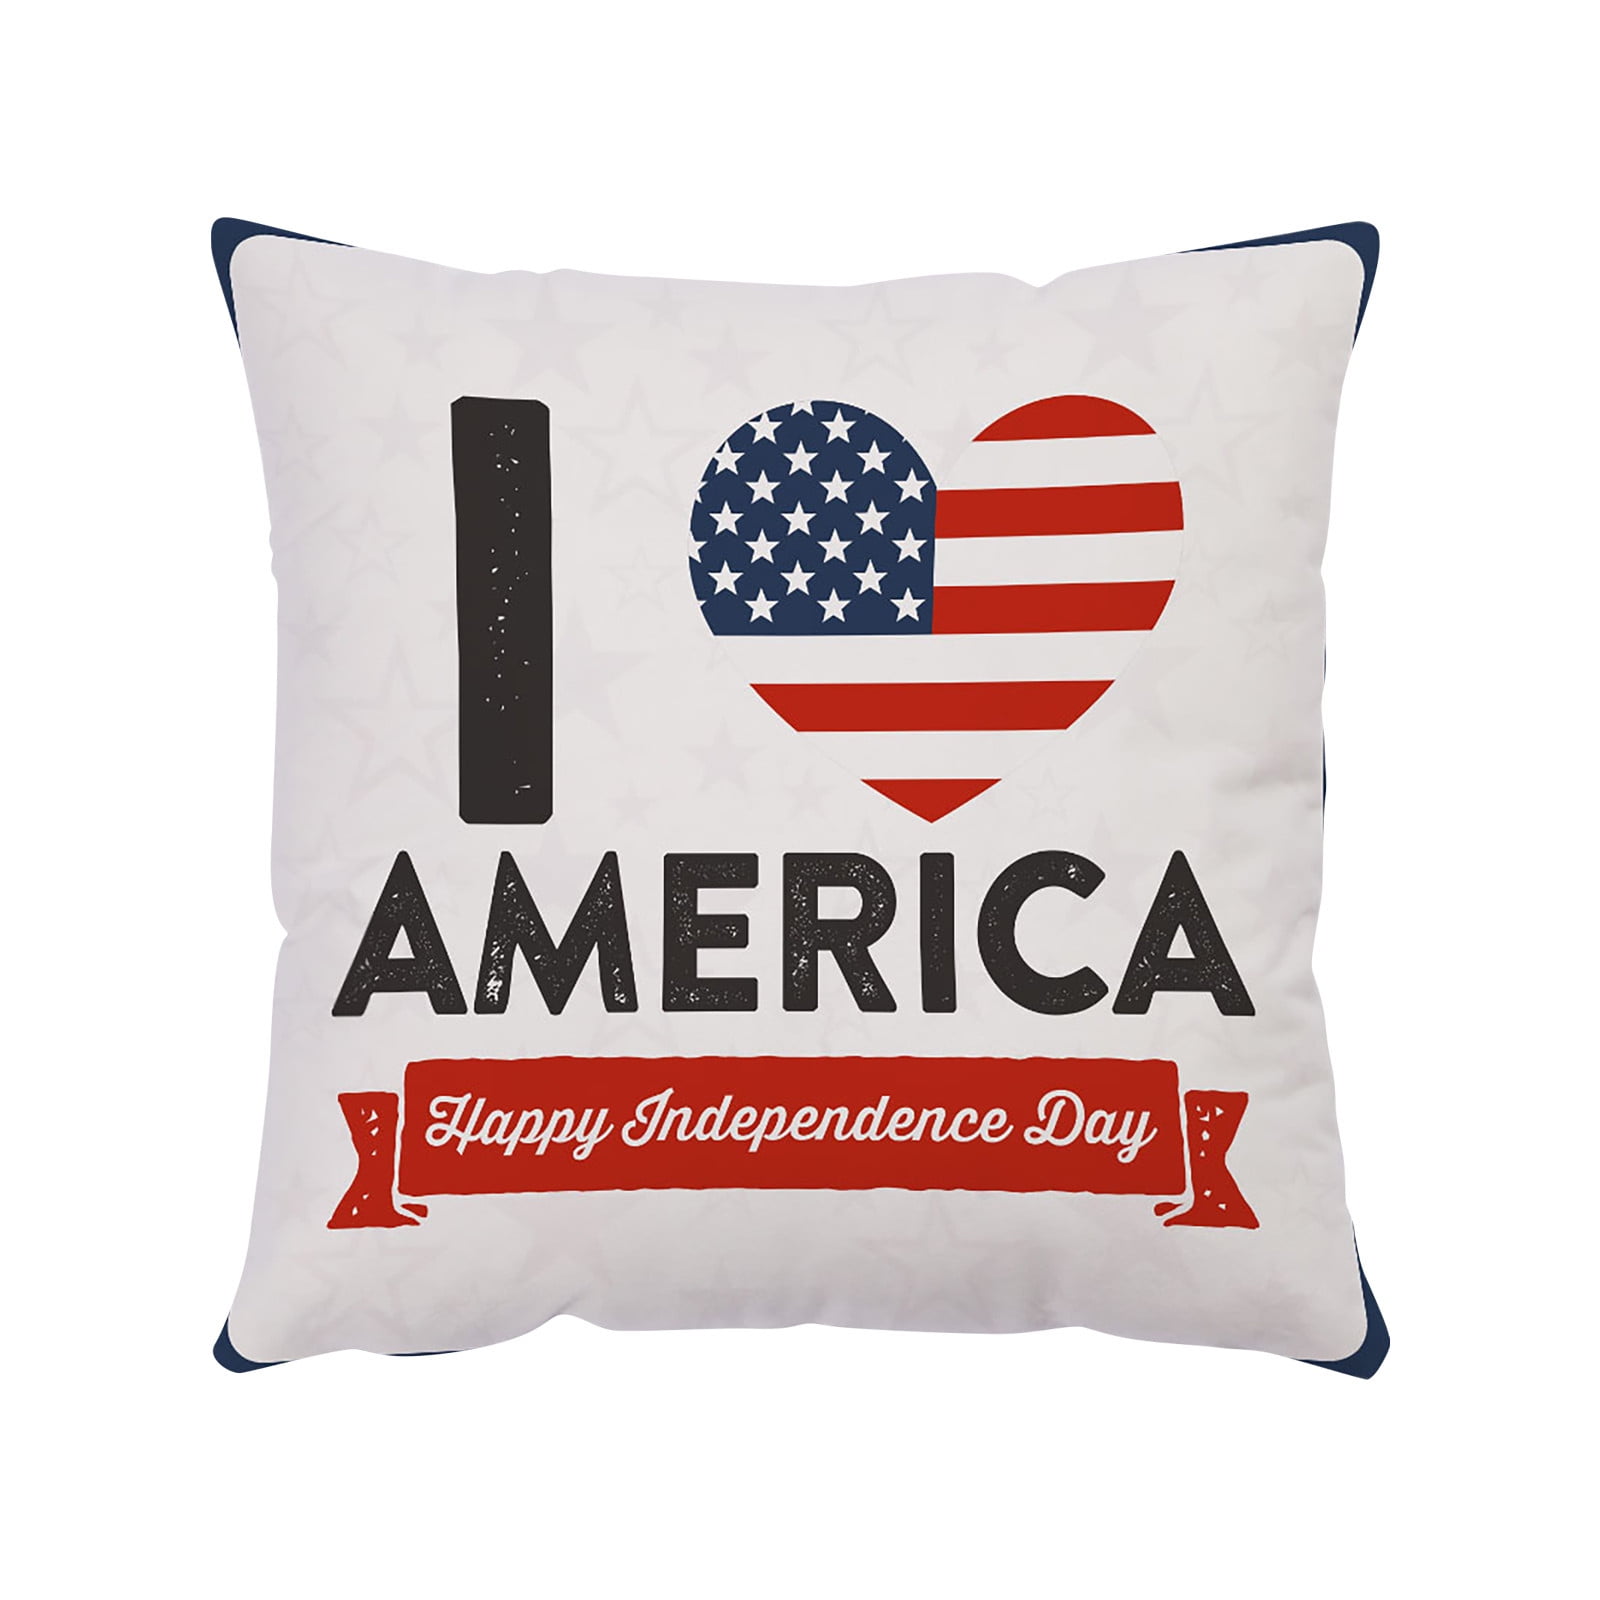 Baofu American Flag Pillow Cases Square Cotton Throw Pillow Covers Soft Breathable Independence Day Zipper Cushion Covers Decoration for Sofa Bed Livingroom 2PCS 20 x 20 inch